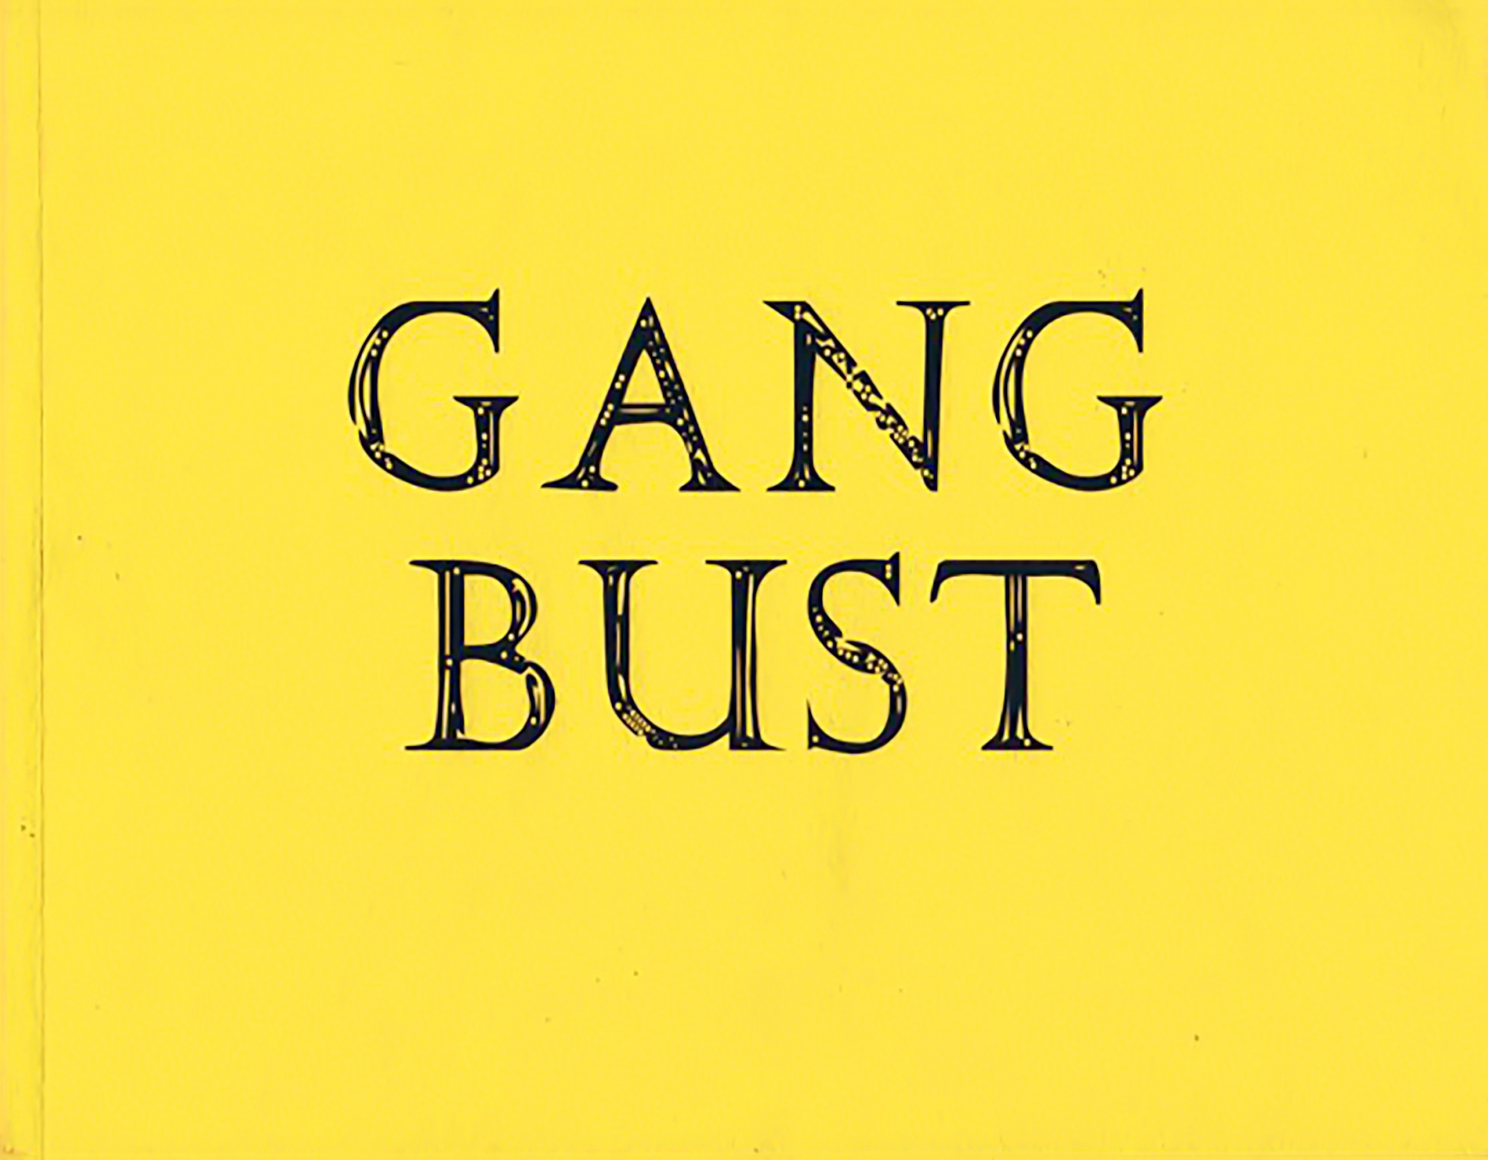 Cover of Gang Bust, William Copley & BFBC, Inc., published by Venus Over Manhattan, New York, 2013